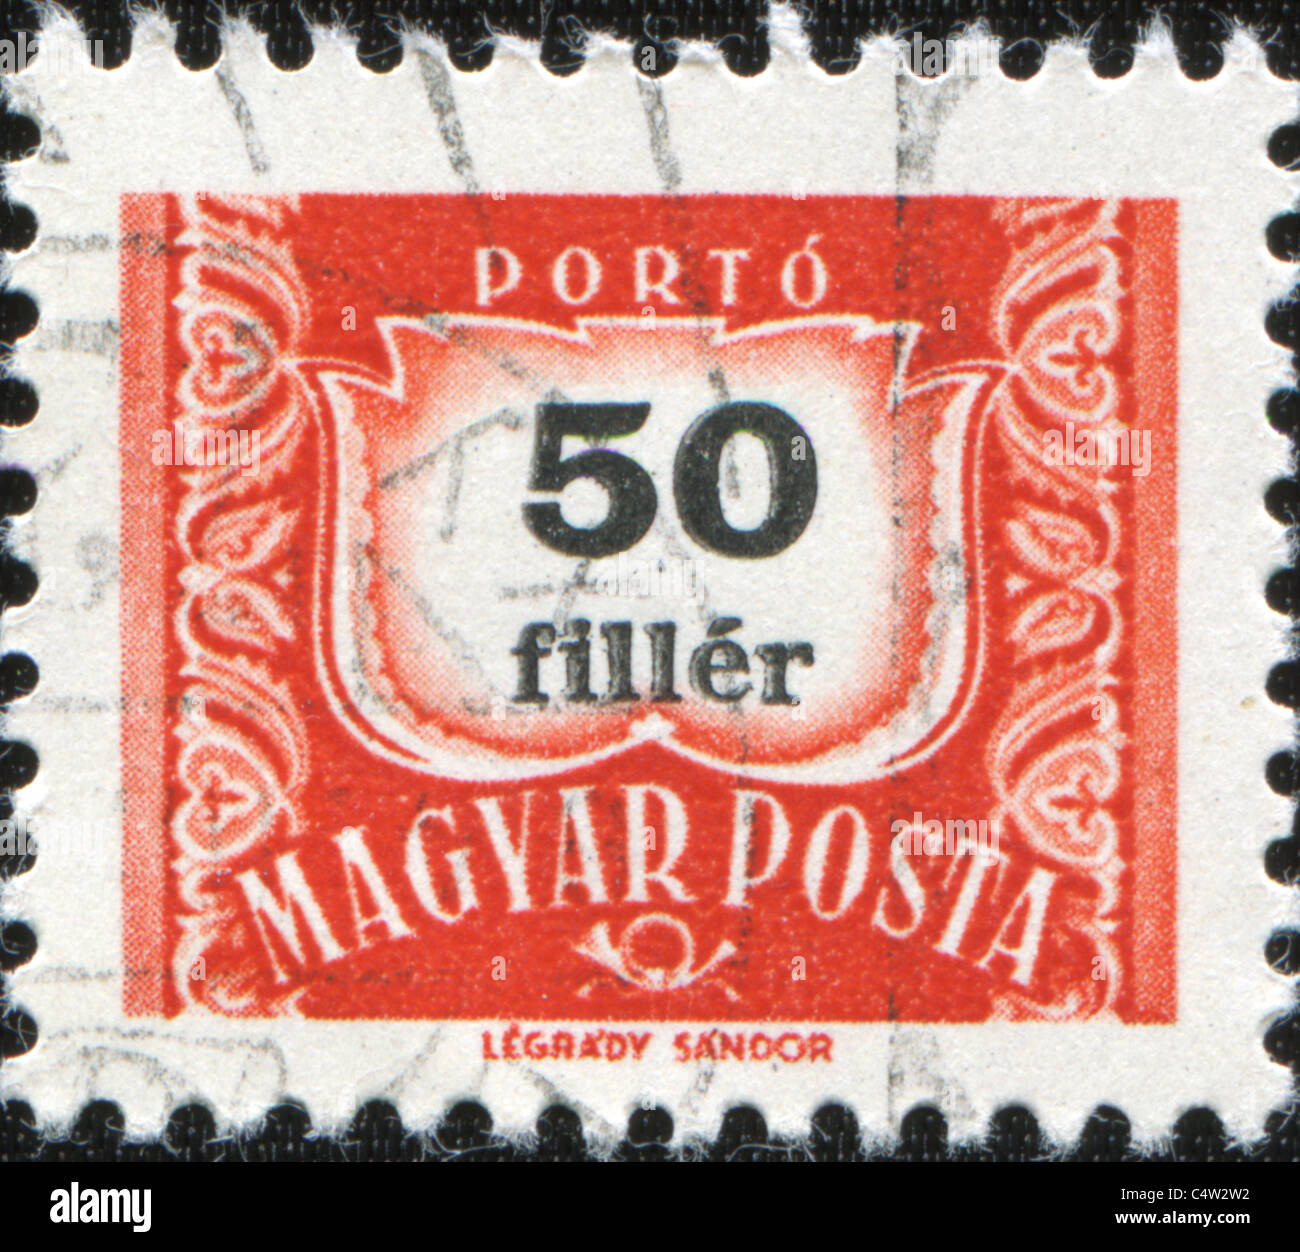 HUNGARY - CIRCA 1958: A Hungarian Used Postage Stamp showing 50 filler, circa 1958 Stock Photo